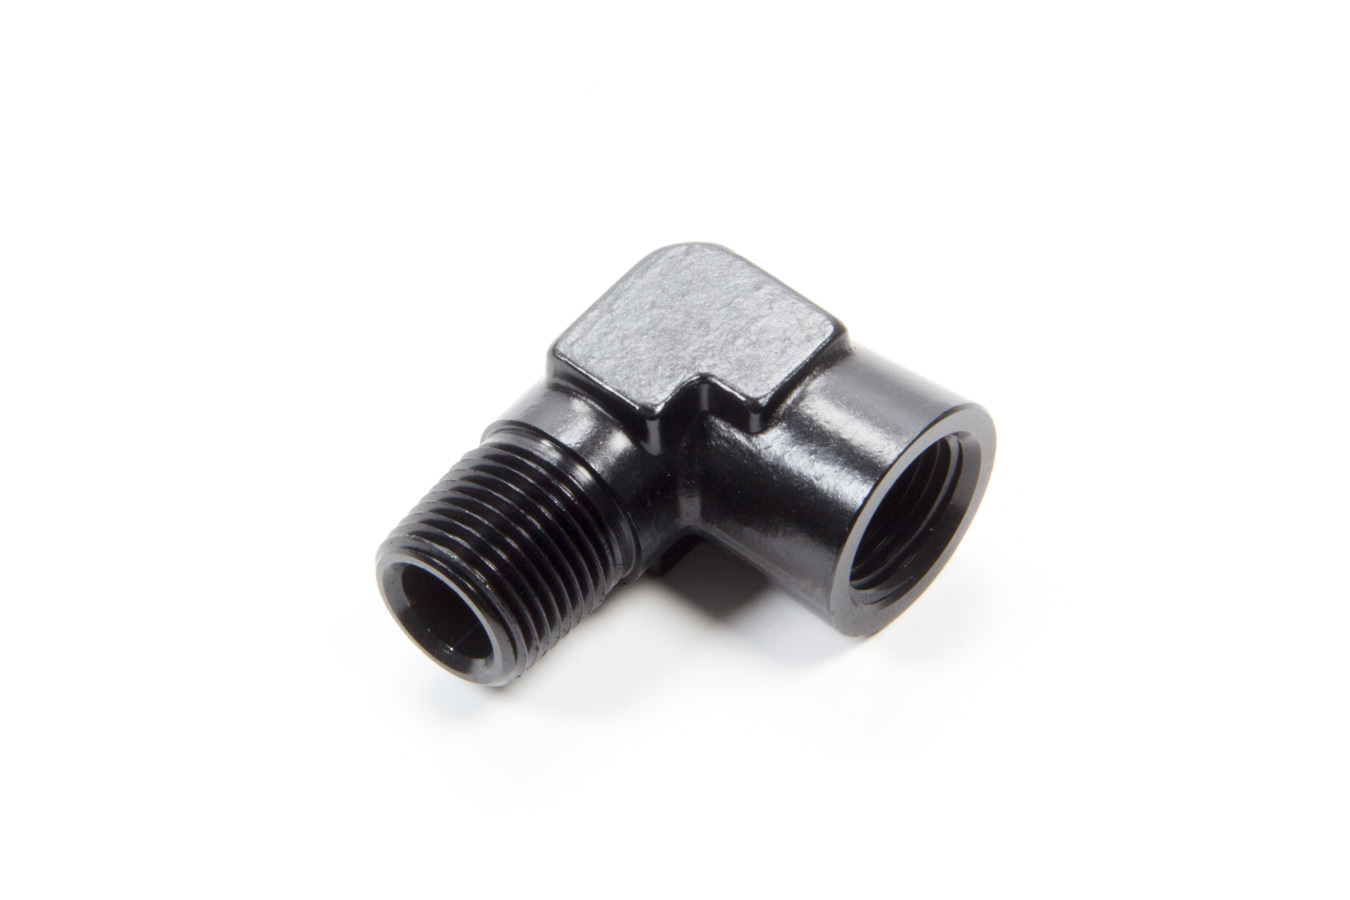 Aeroquip FCM5149 Fitting, Adapter, 90 Degree, 3/8 in NPT Male to 3/8 in NPT Female, Aluminum, Black Anodized, Each